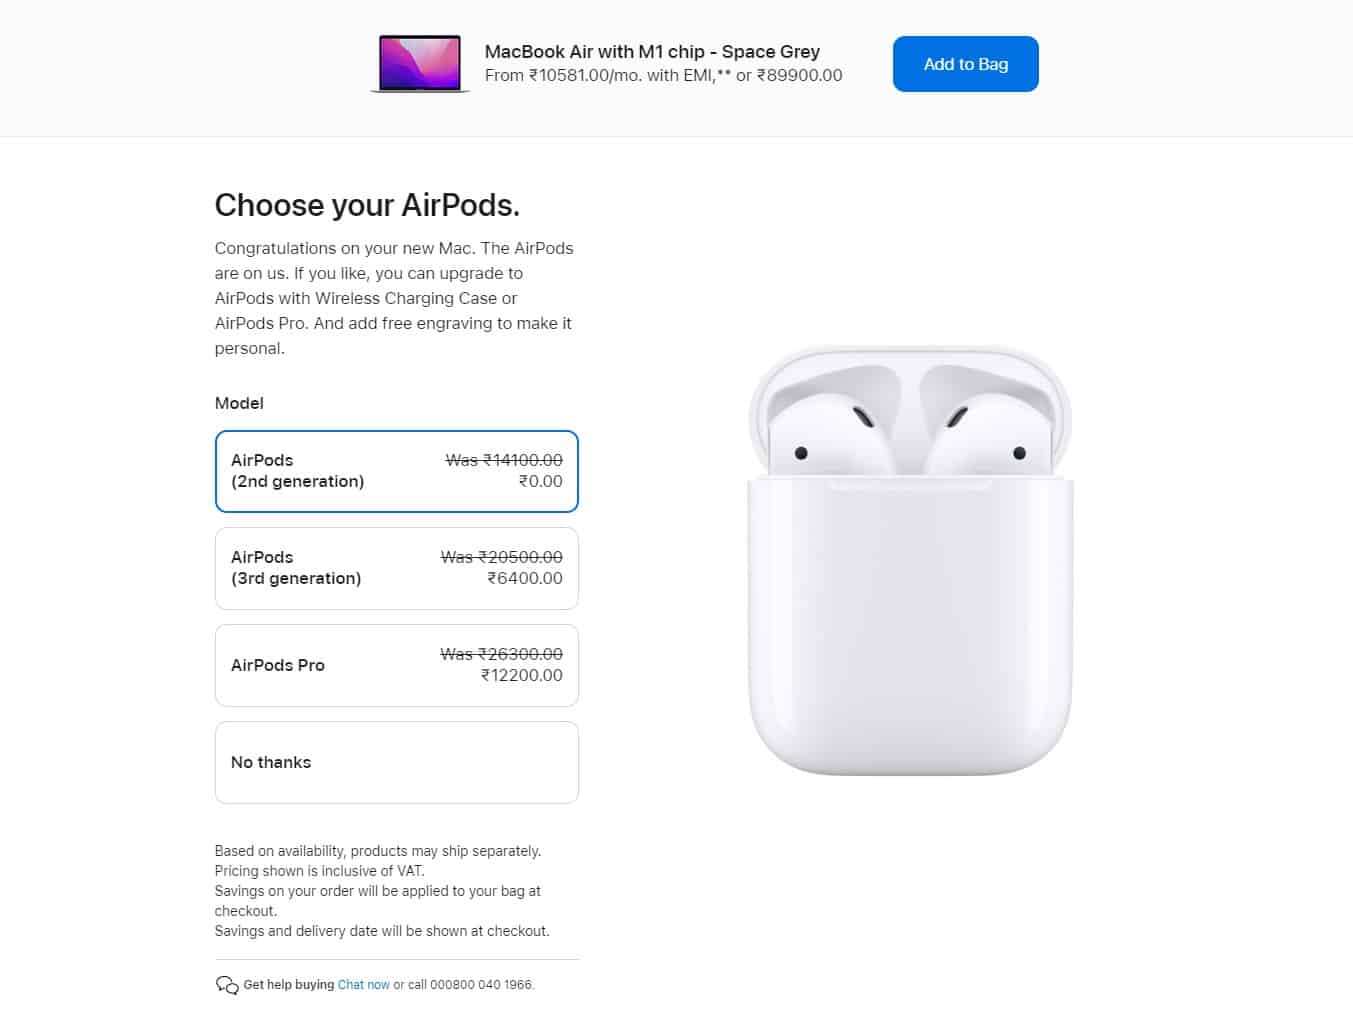 how to get free airpods from apple in 2022